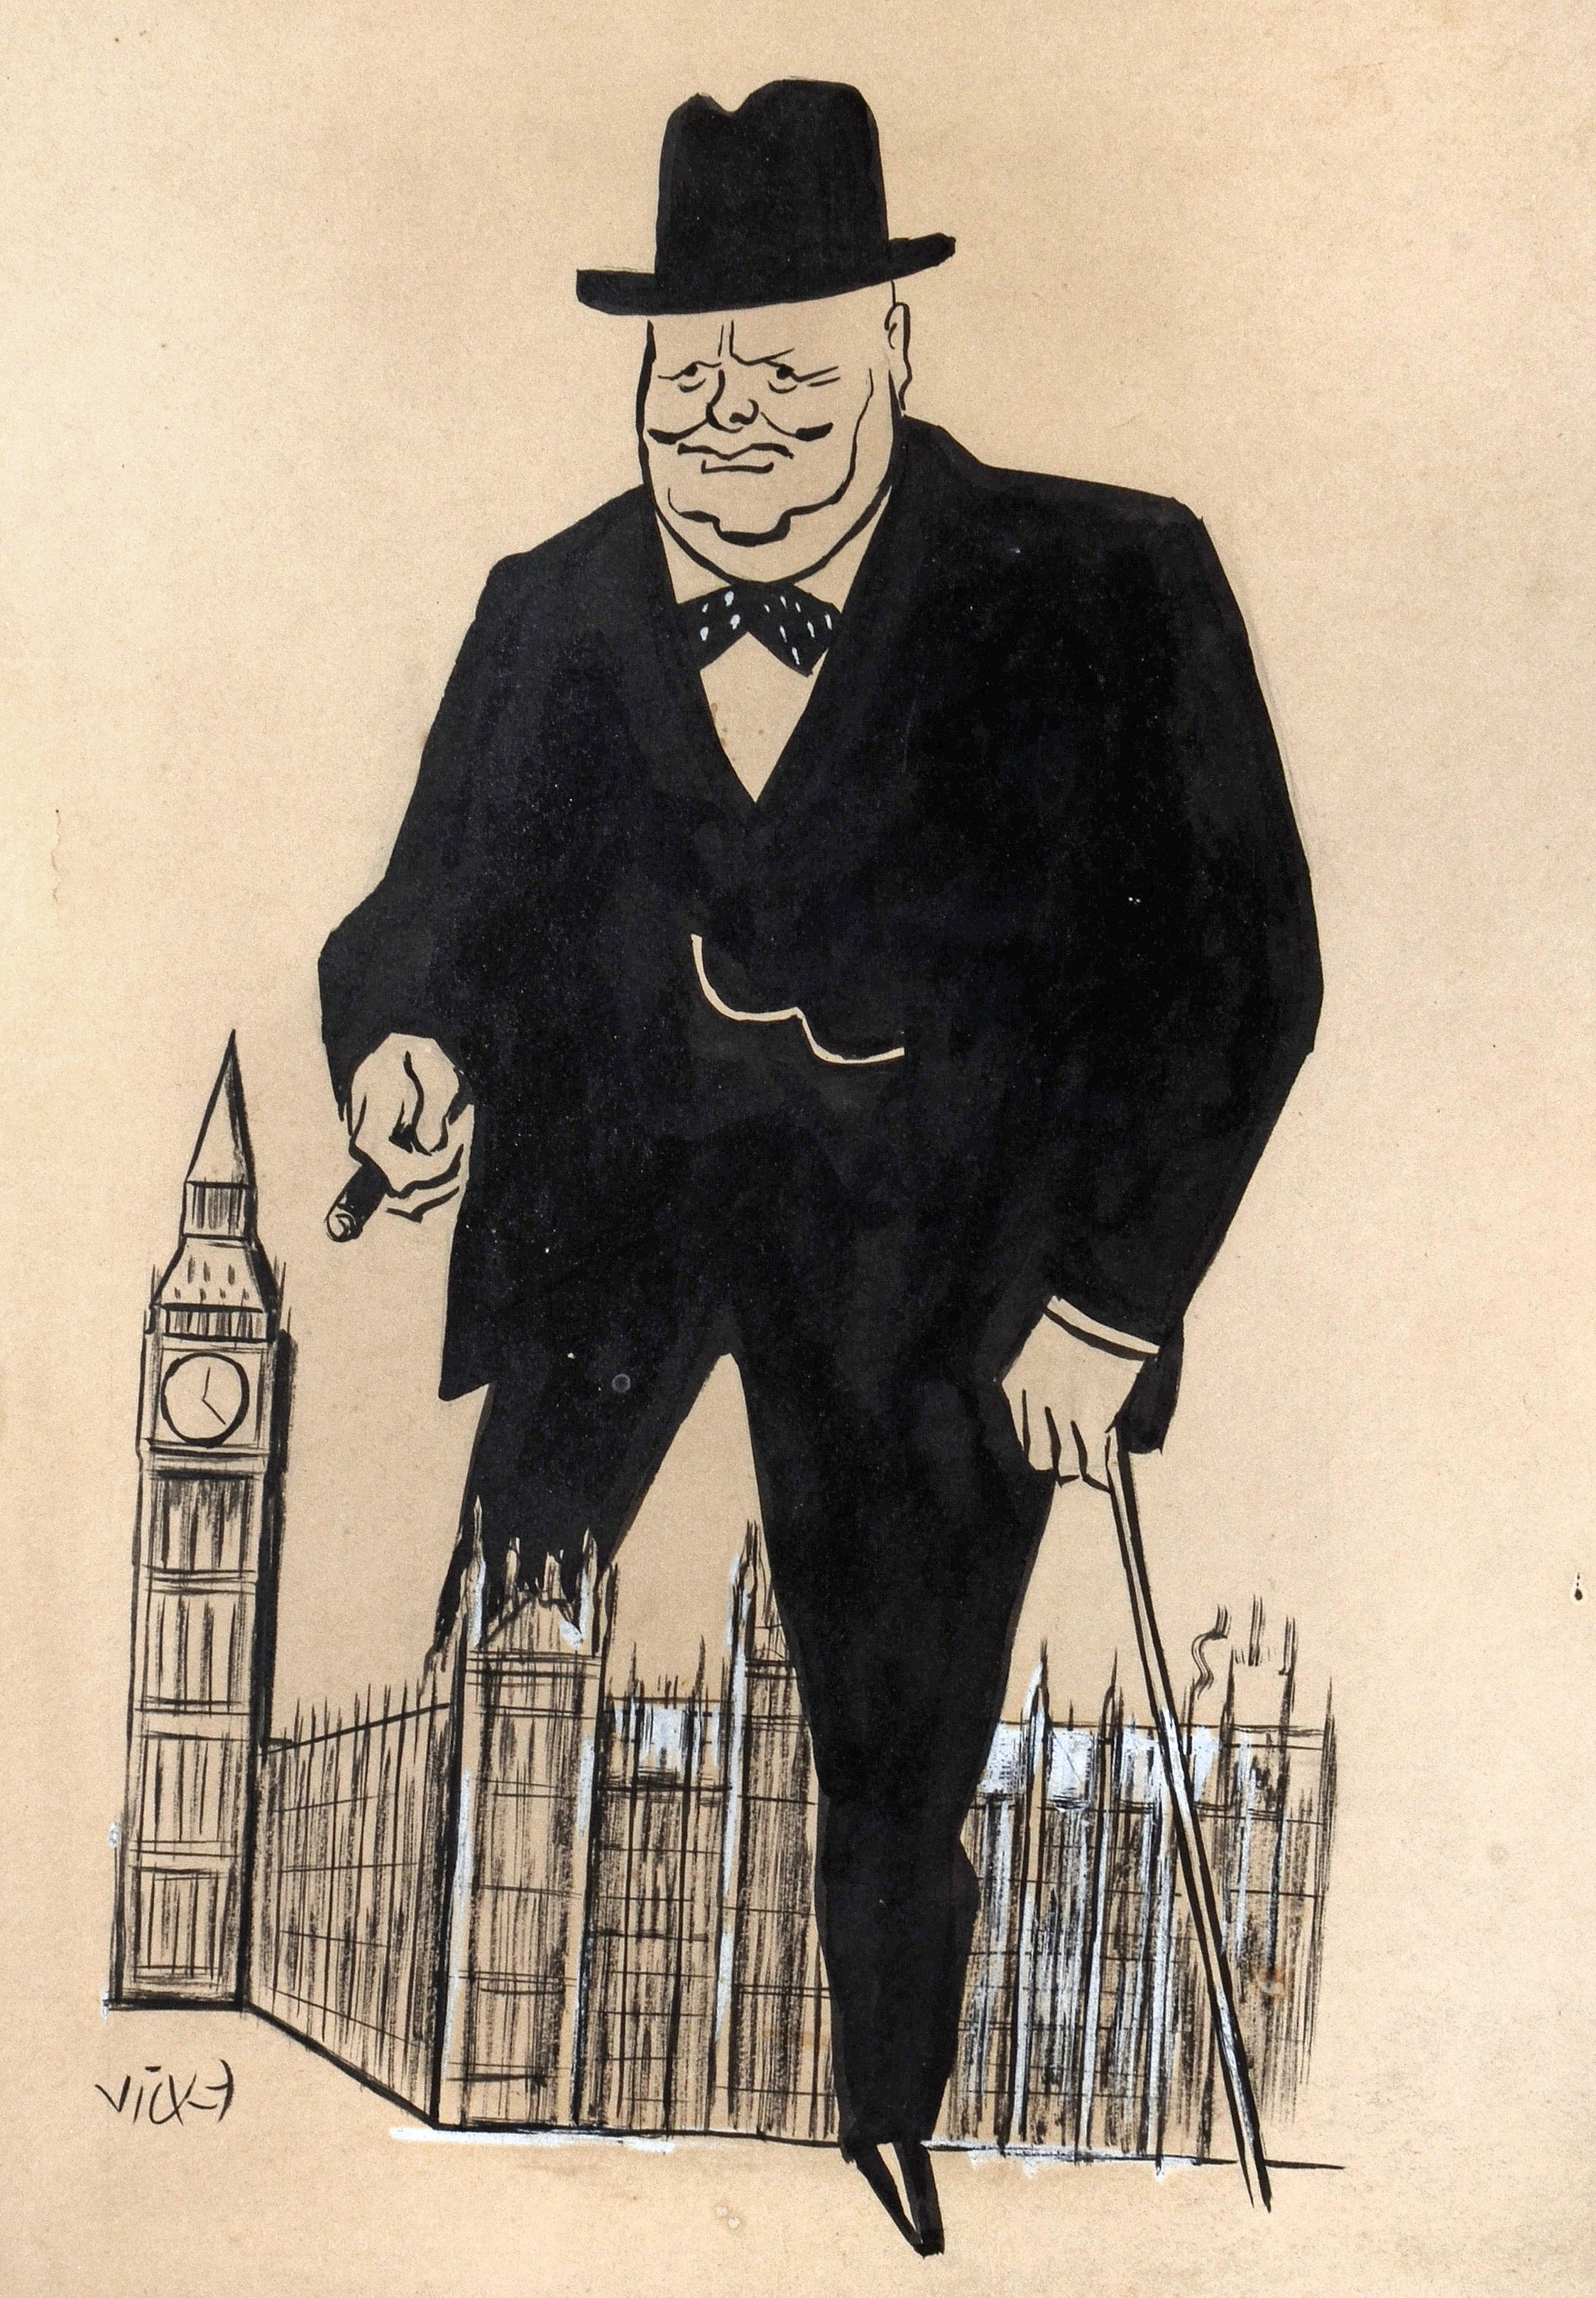 Winston Churchill is conquering the house, by Vicky (Victor Weisz).